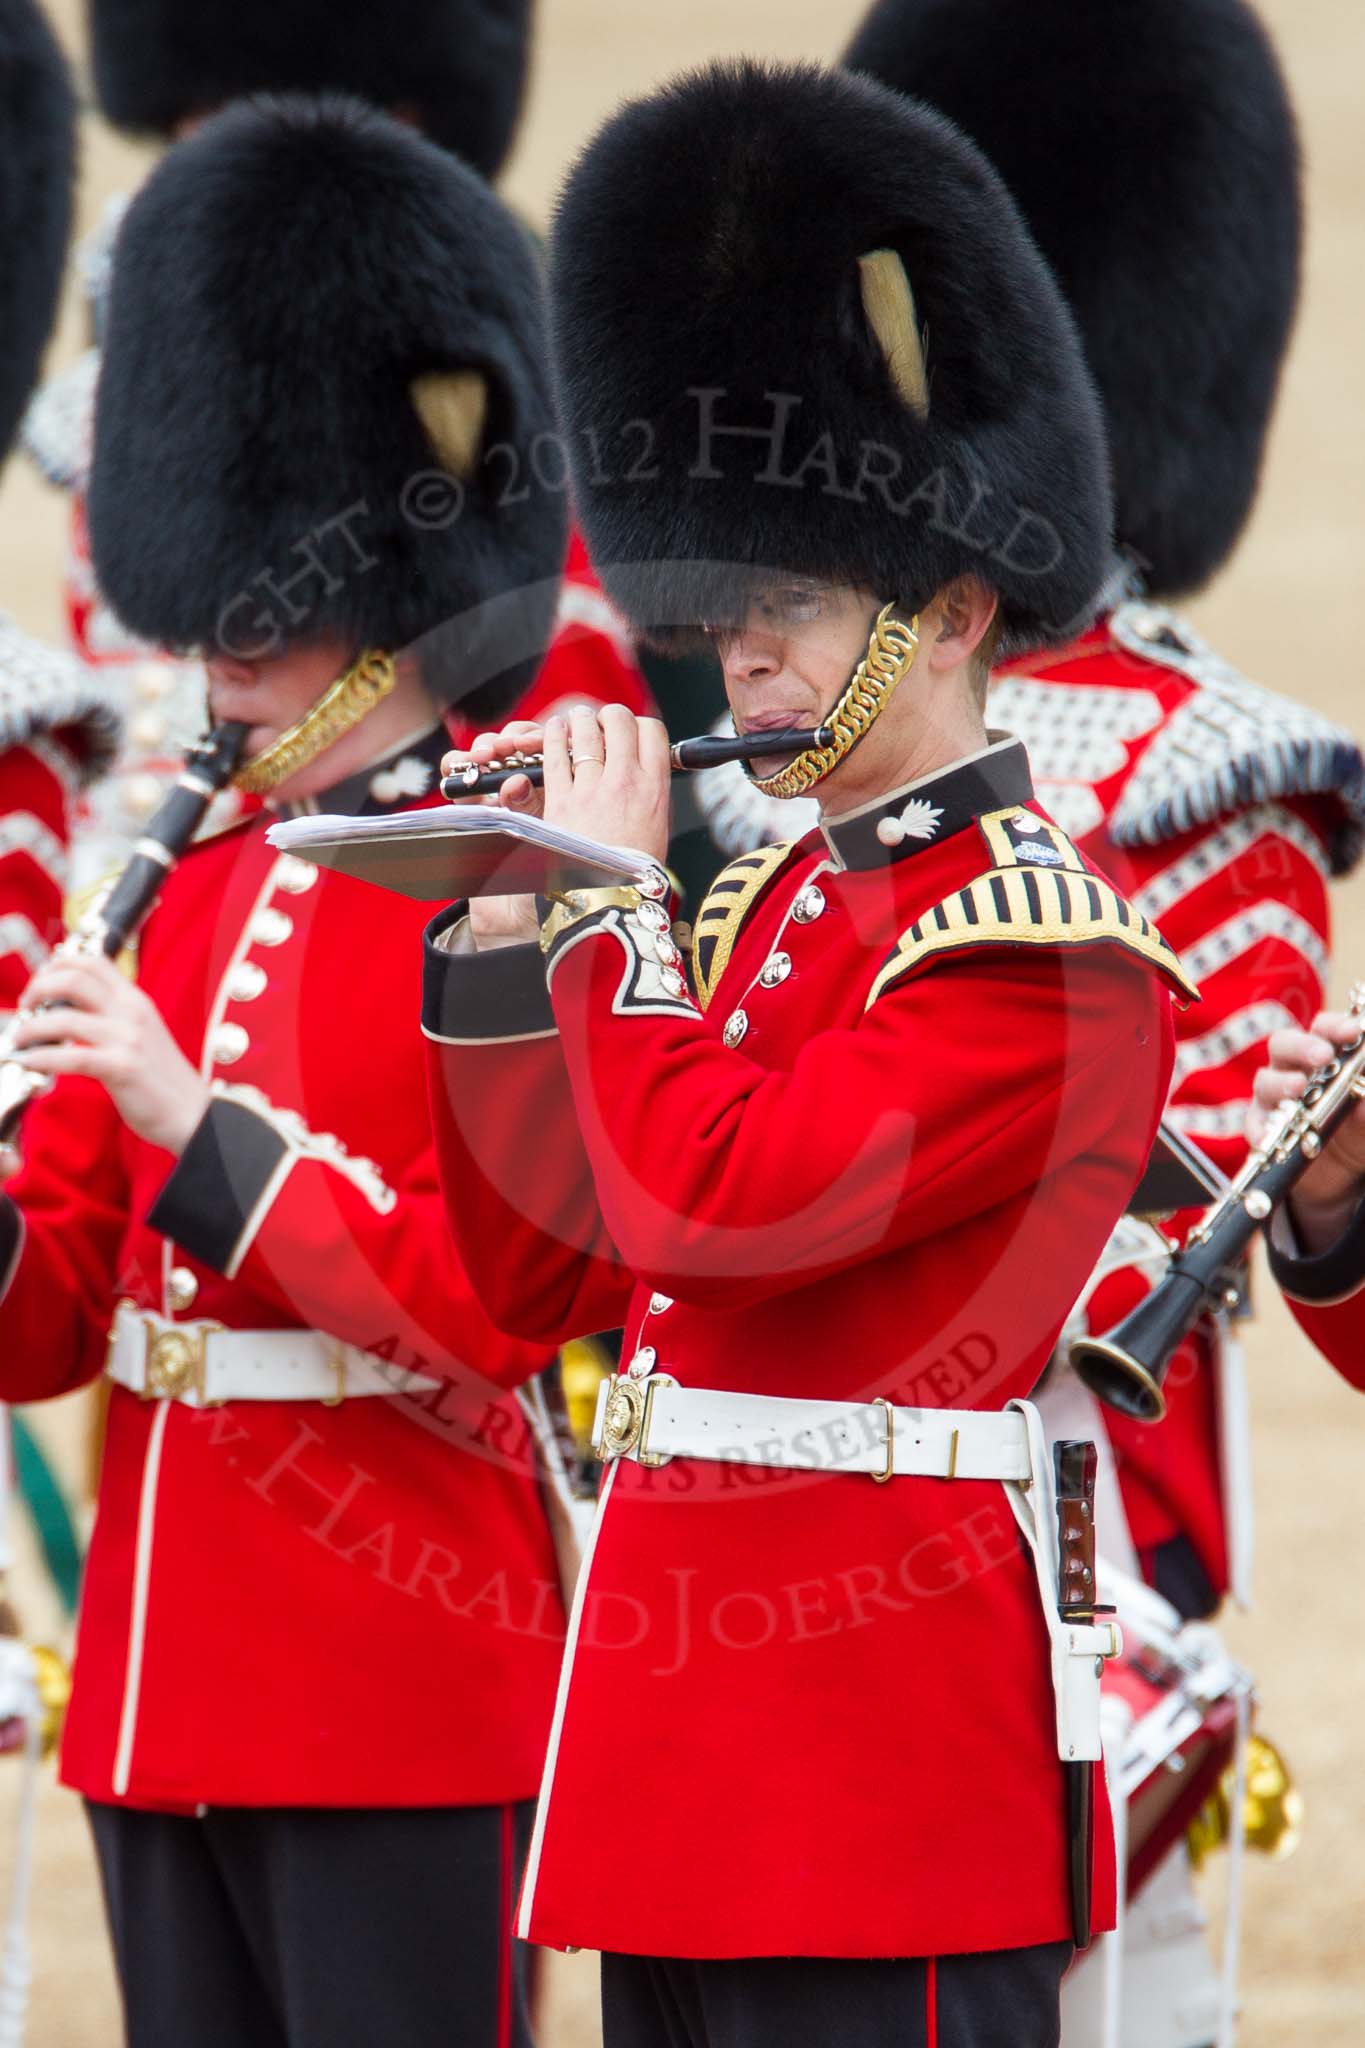 The Colonel's Review 2012: A Grenadier Guards Band flutist..
Horse Guards Parade, Westminster,
London SW1,

United Kingdom,
on 09 June 2012 at 11:09, image #227